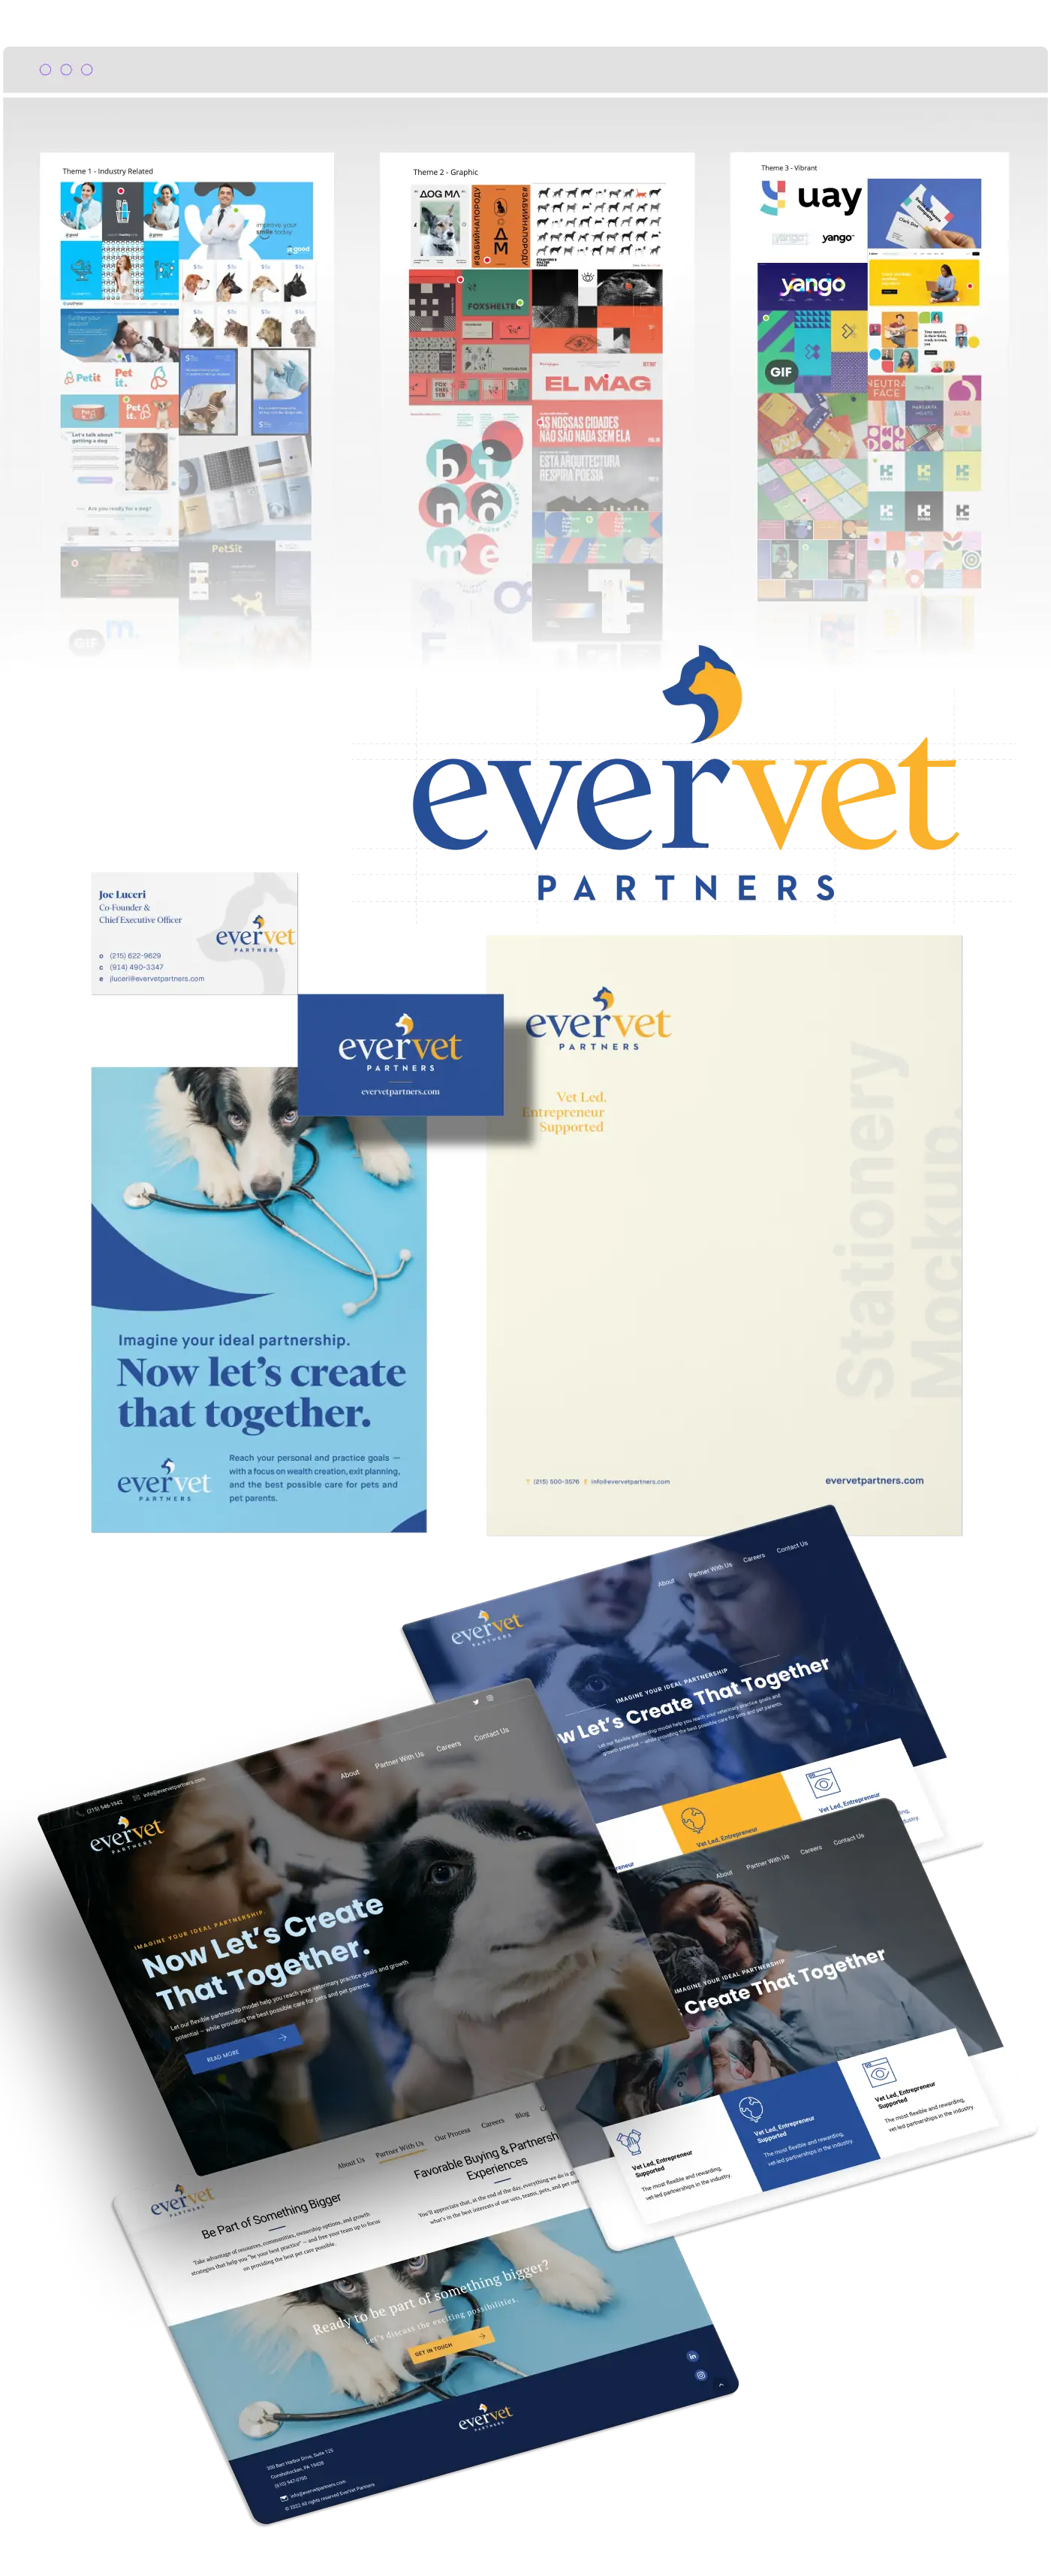 design explorations for EverVet with animal graphics and logos